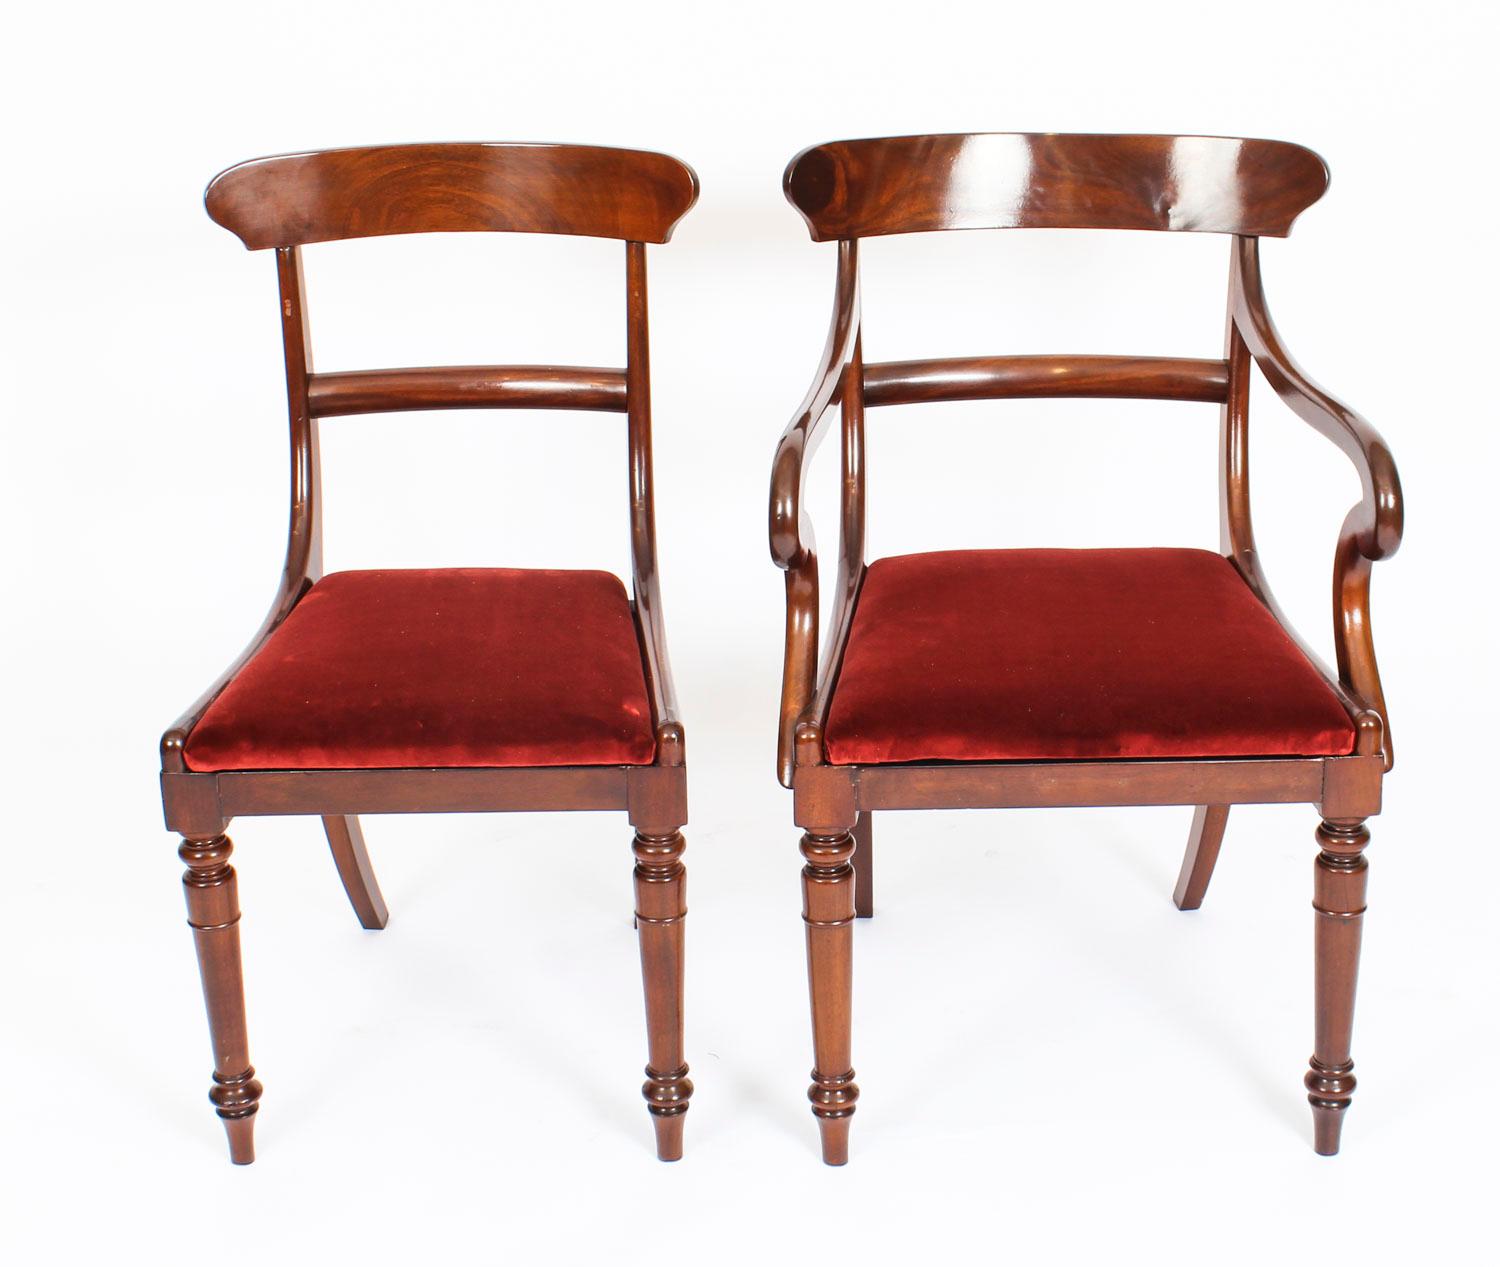 This is a fabulous set of twelve antique English Victorian bar back dining chairs, circa 1860 in date.

The set comprises ten sidechairs and a pair of armchairs, and they have all been masterfully crafted in beautiful solid flame mahogany. They